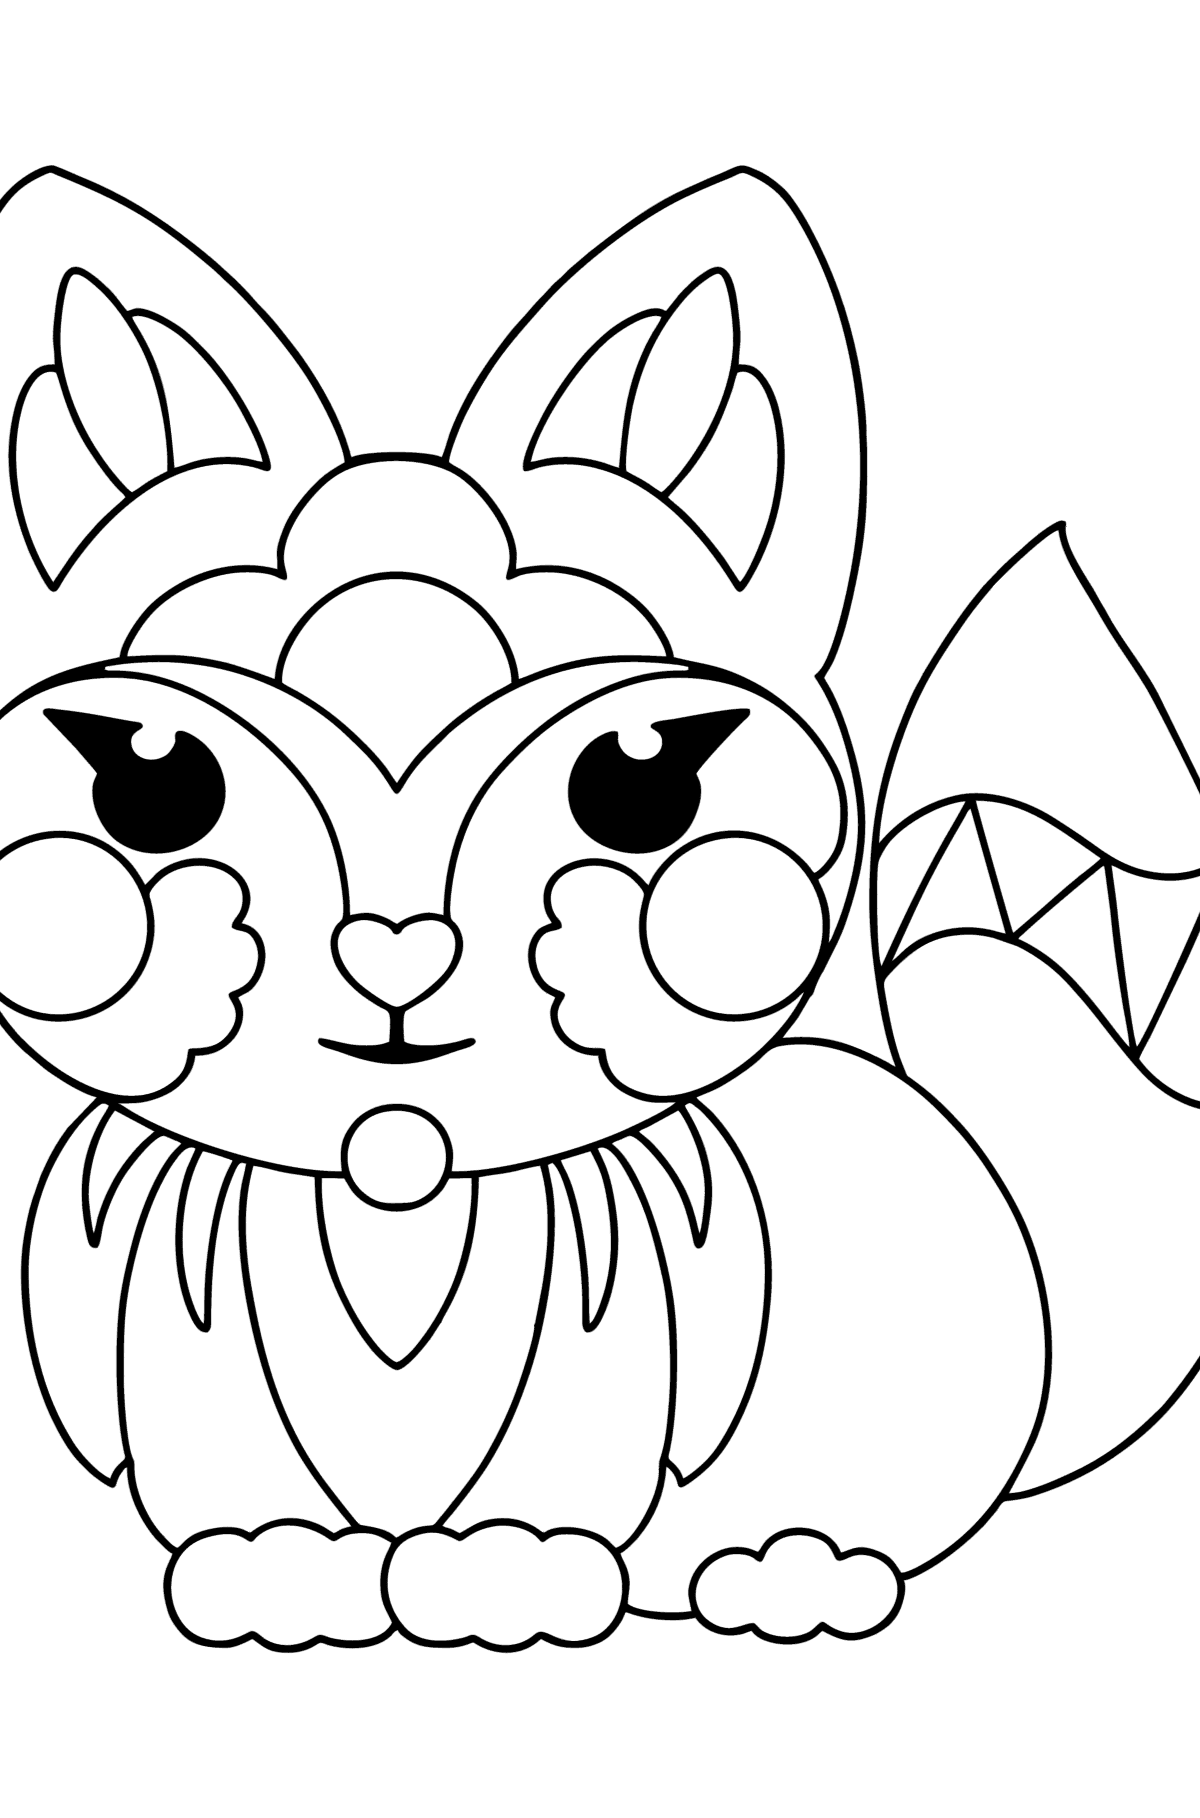 Anti stress Fox coloring page - Coloring Pages for Kids